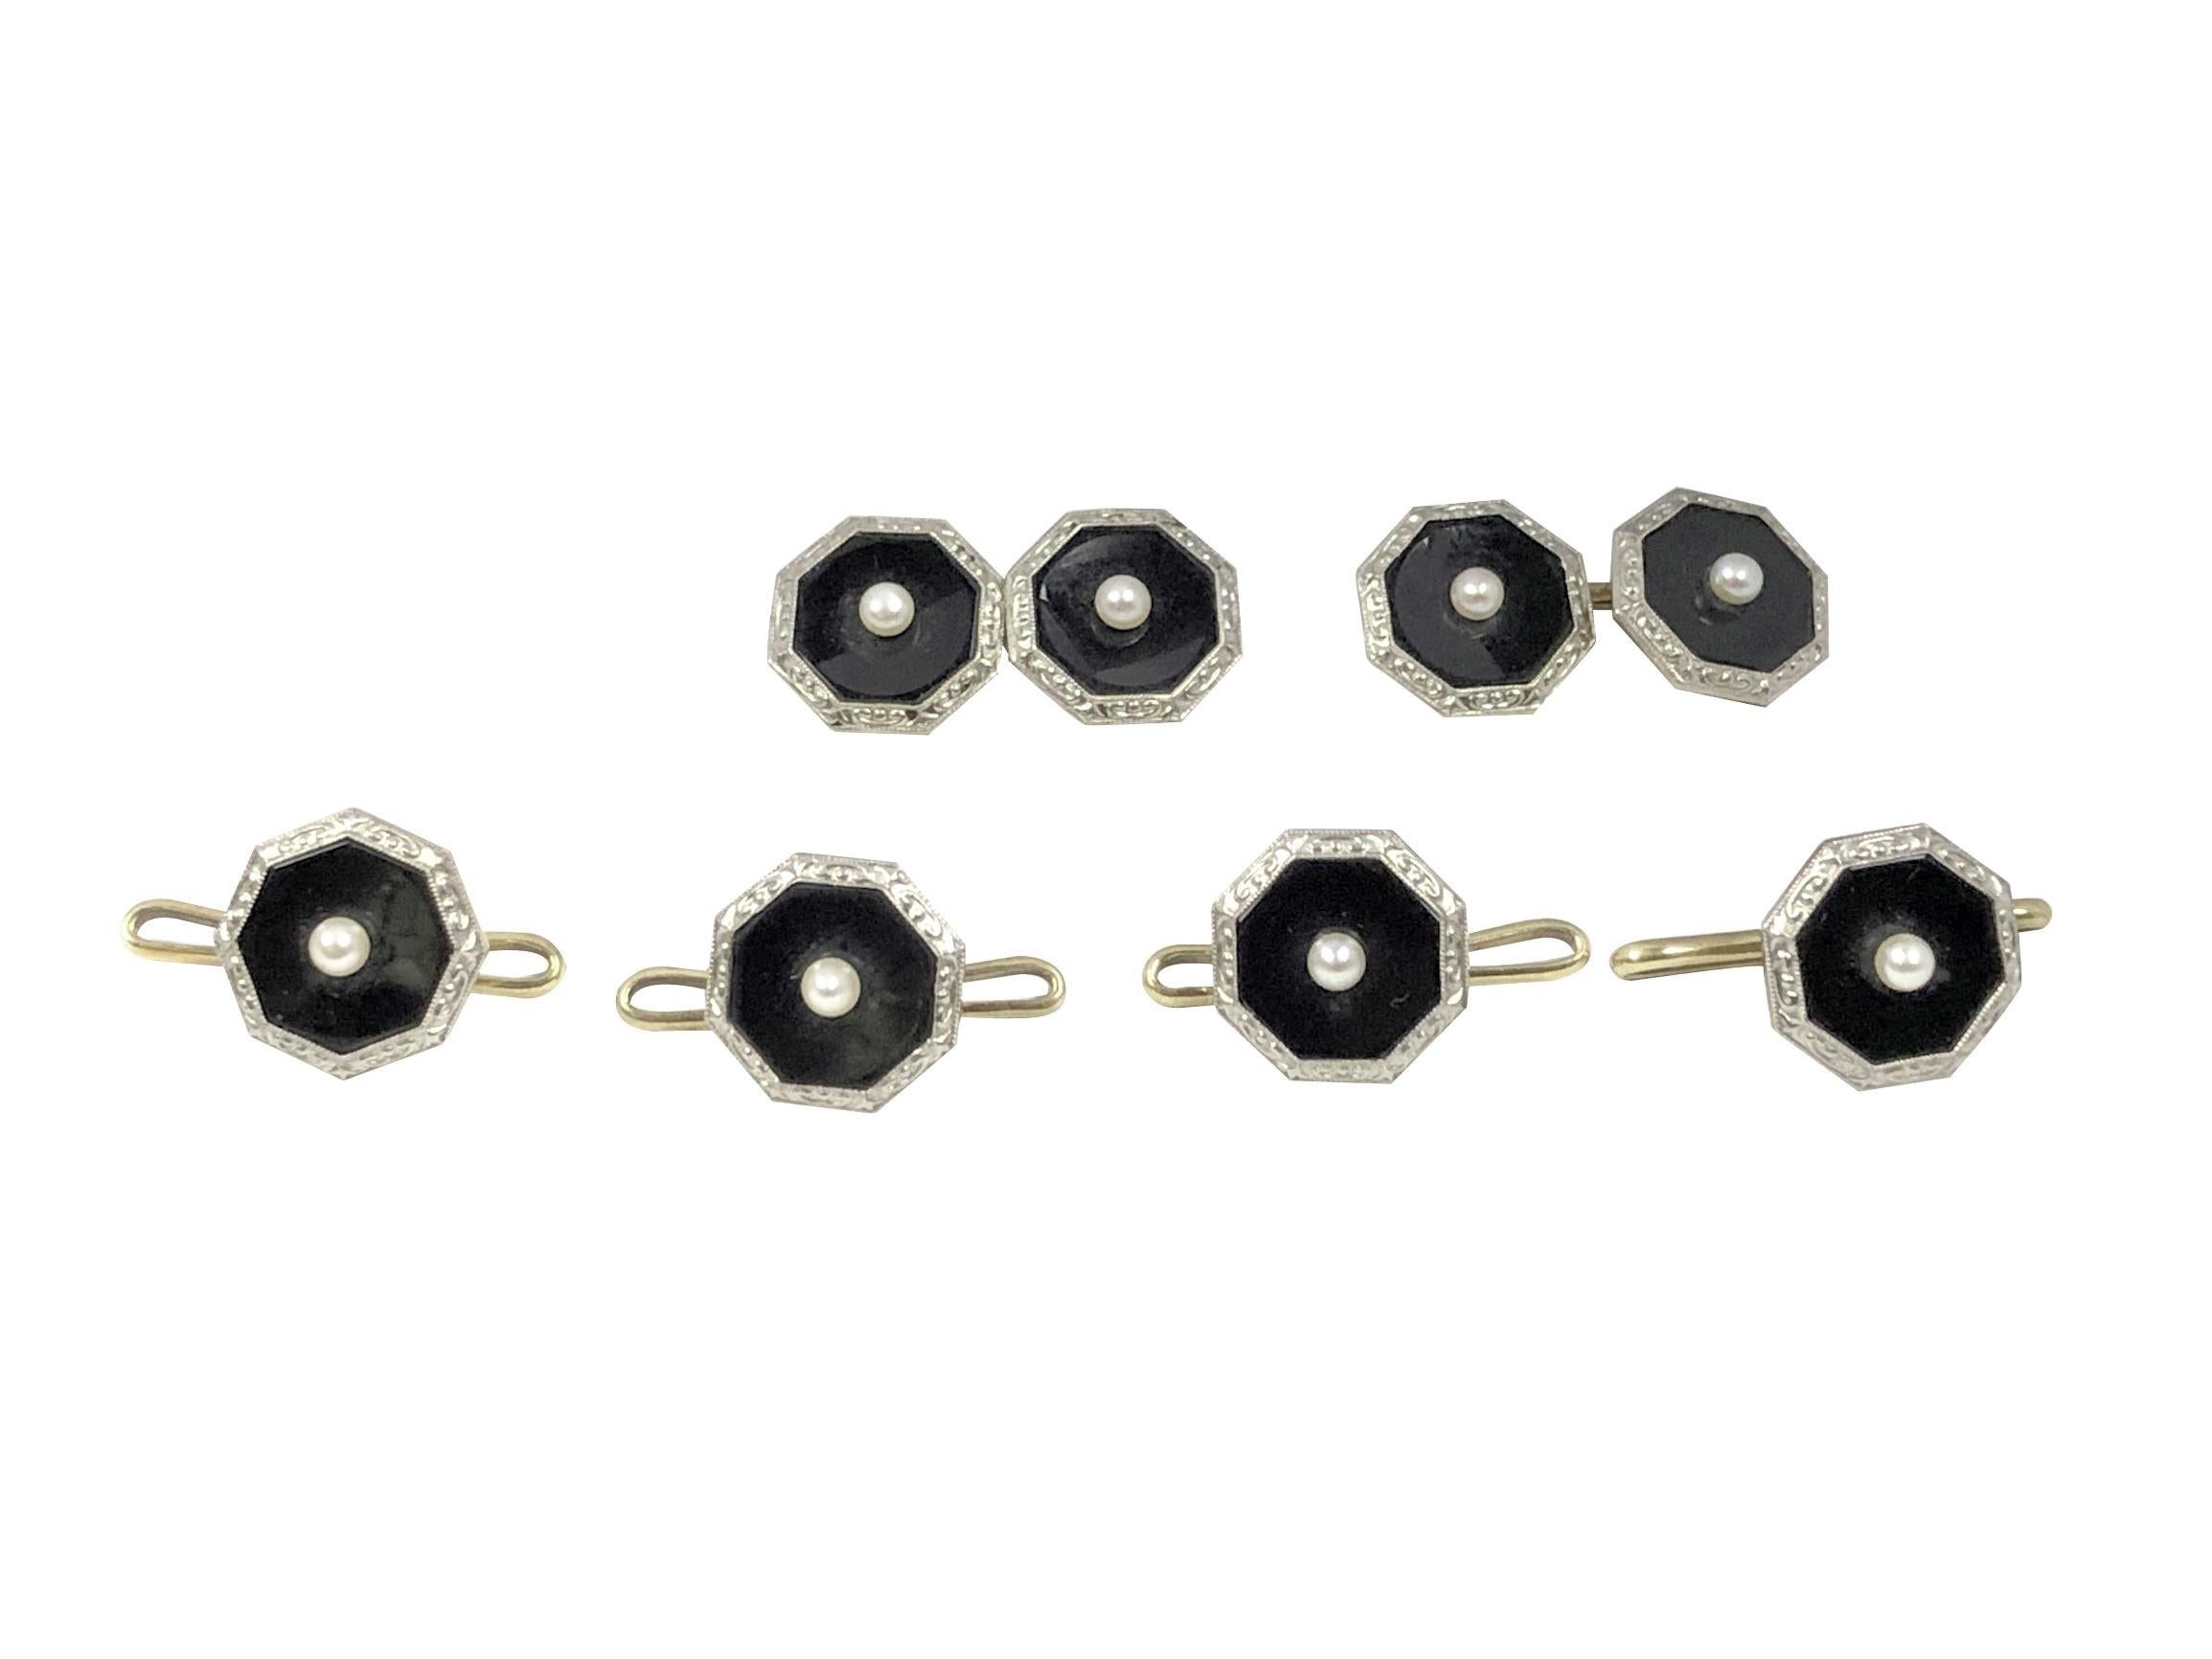 Circa 1930 Platinum Top and 14K Yellow Gold Tuxedo Dress Set, comprising of Cufflinks and 4 matching Shirt Studs, the Octagon shape tops measure just under 1/2 inch in Diameter and are set with Black Onyx with A Pearl set in the center. 